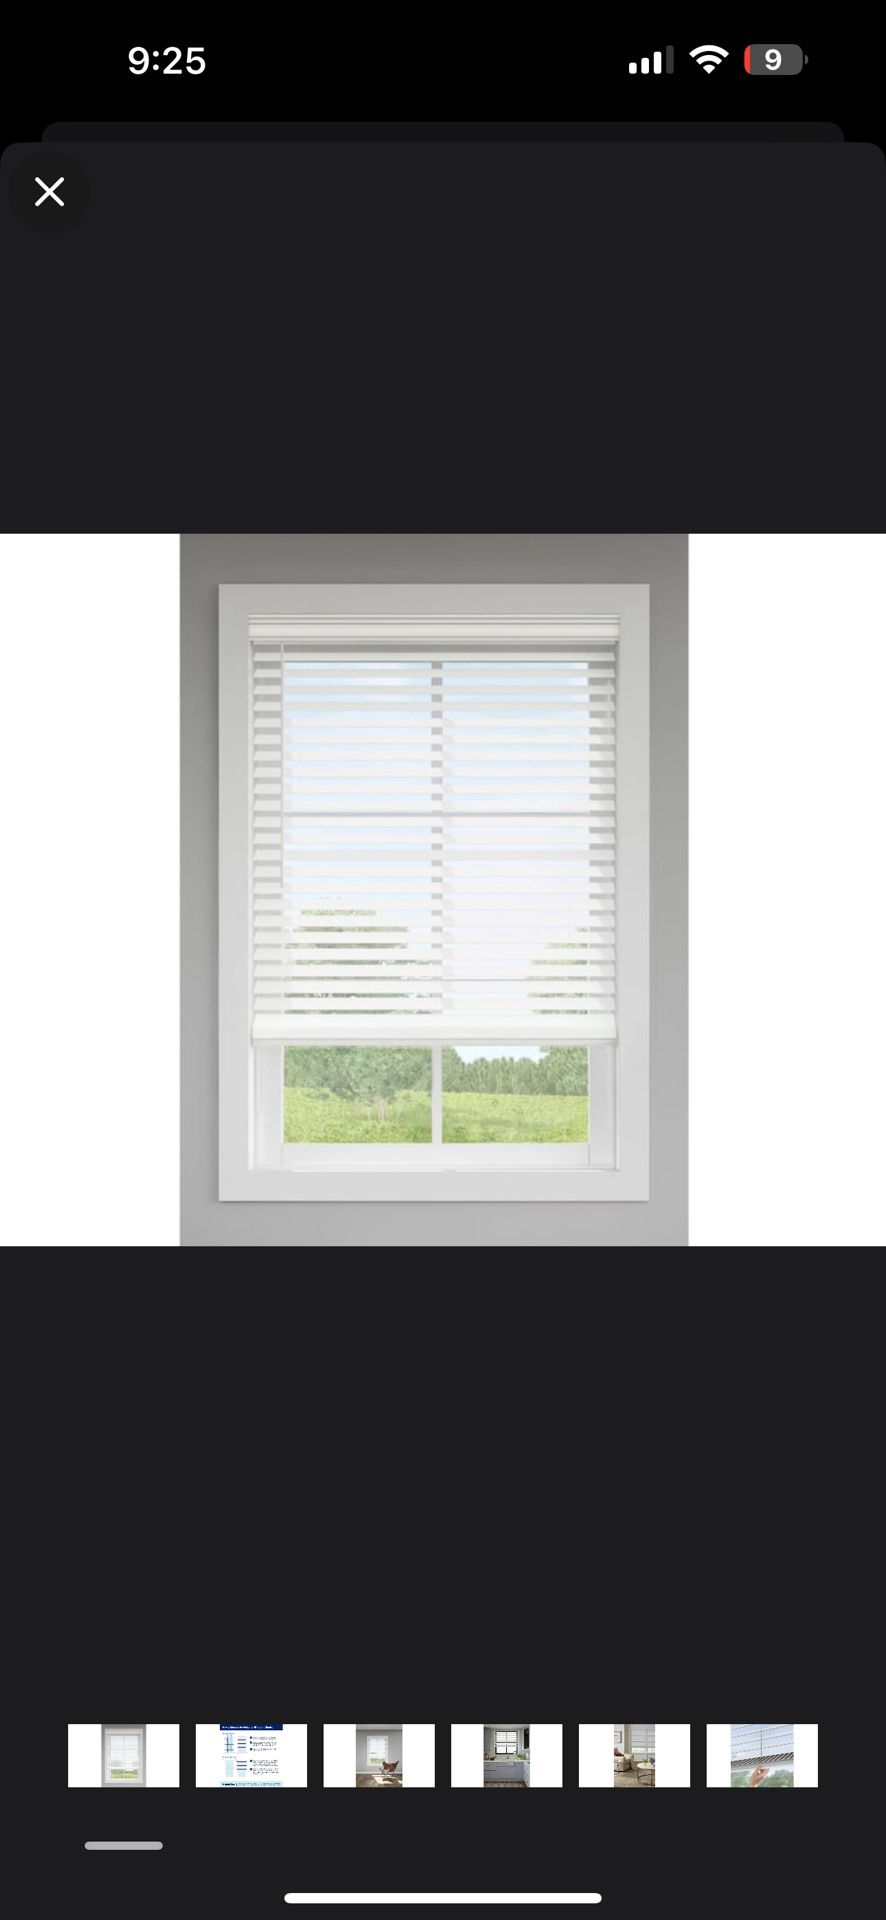 Faux Wood Horizontal Blinds 47x72in 